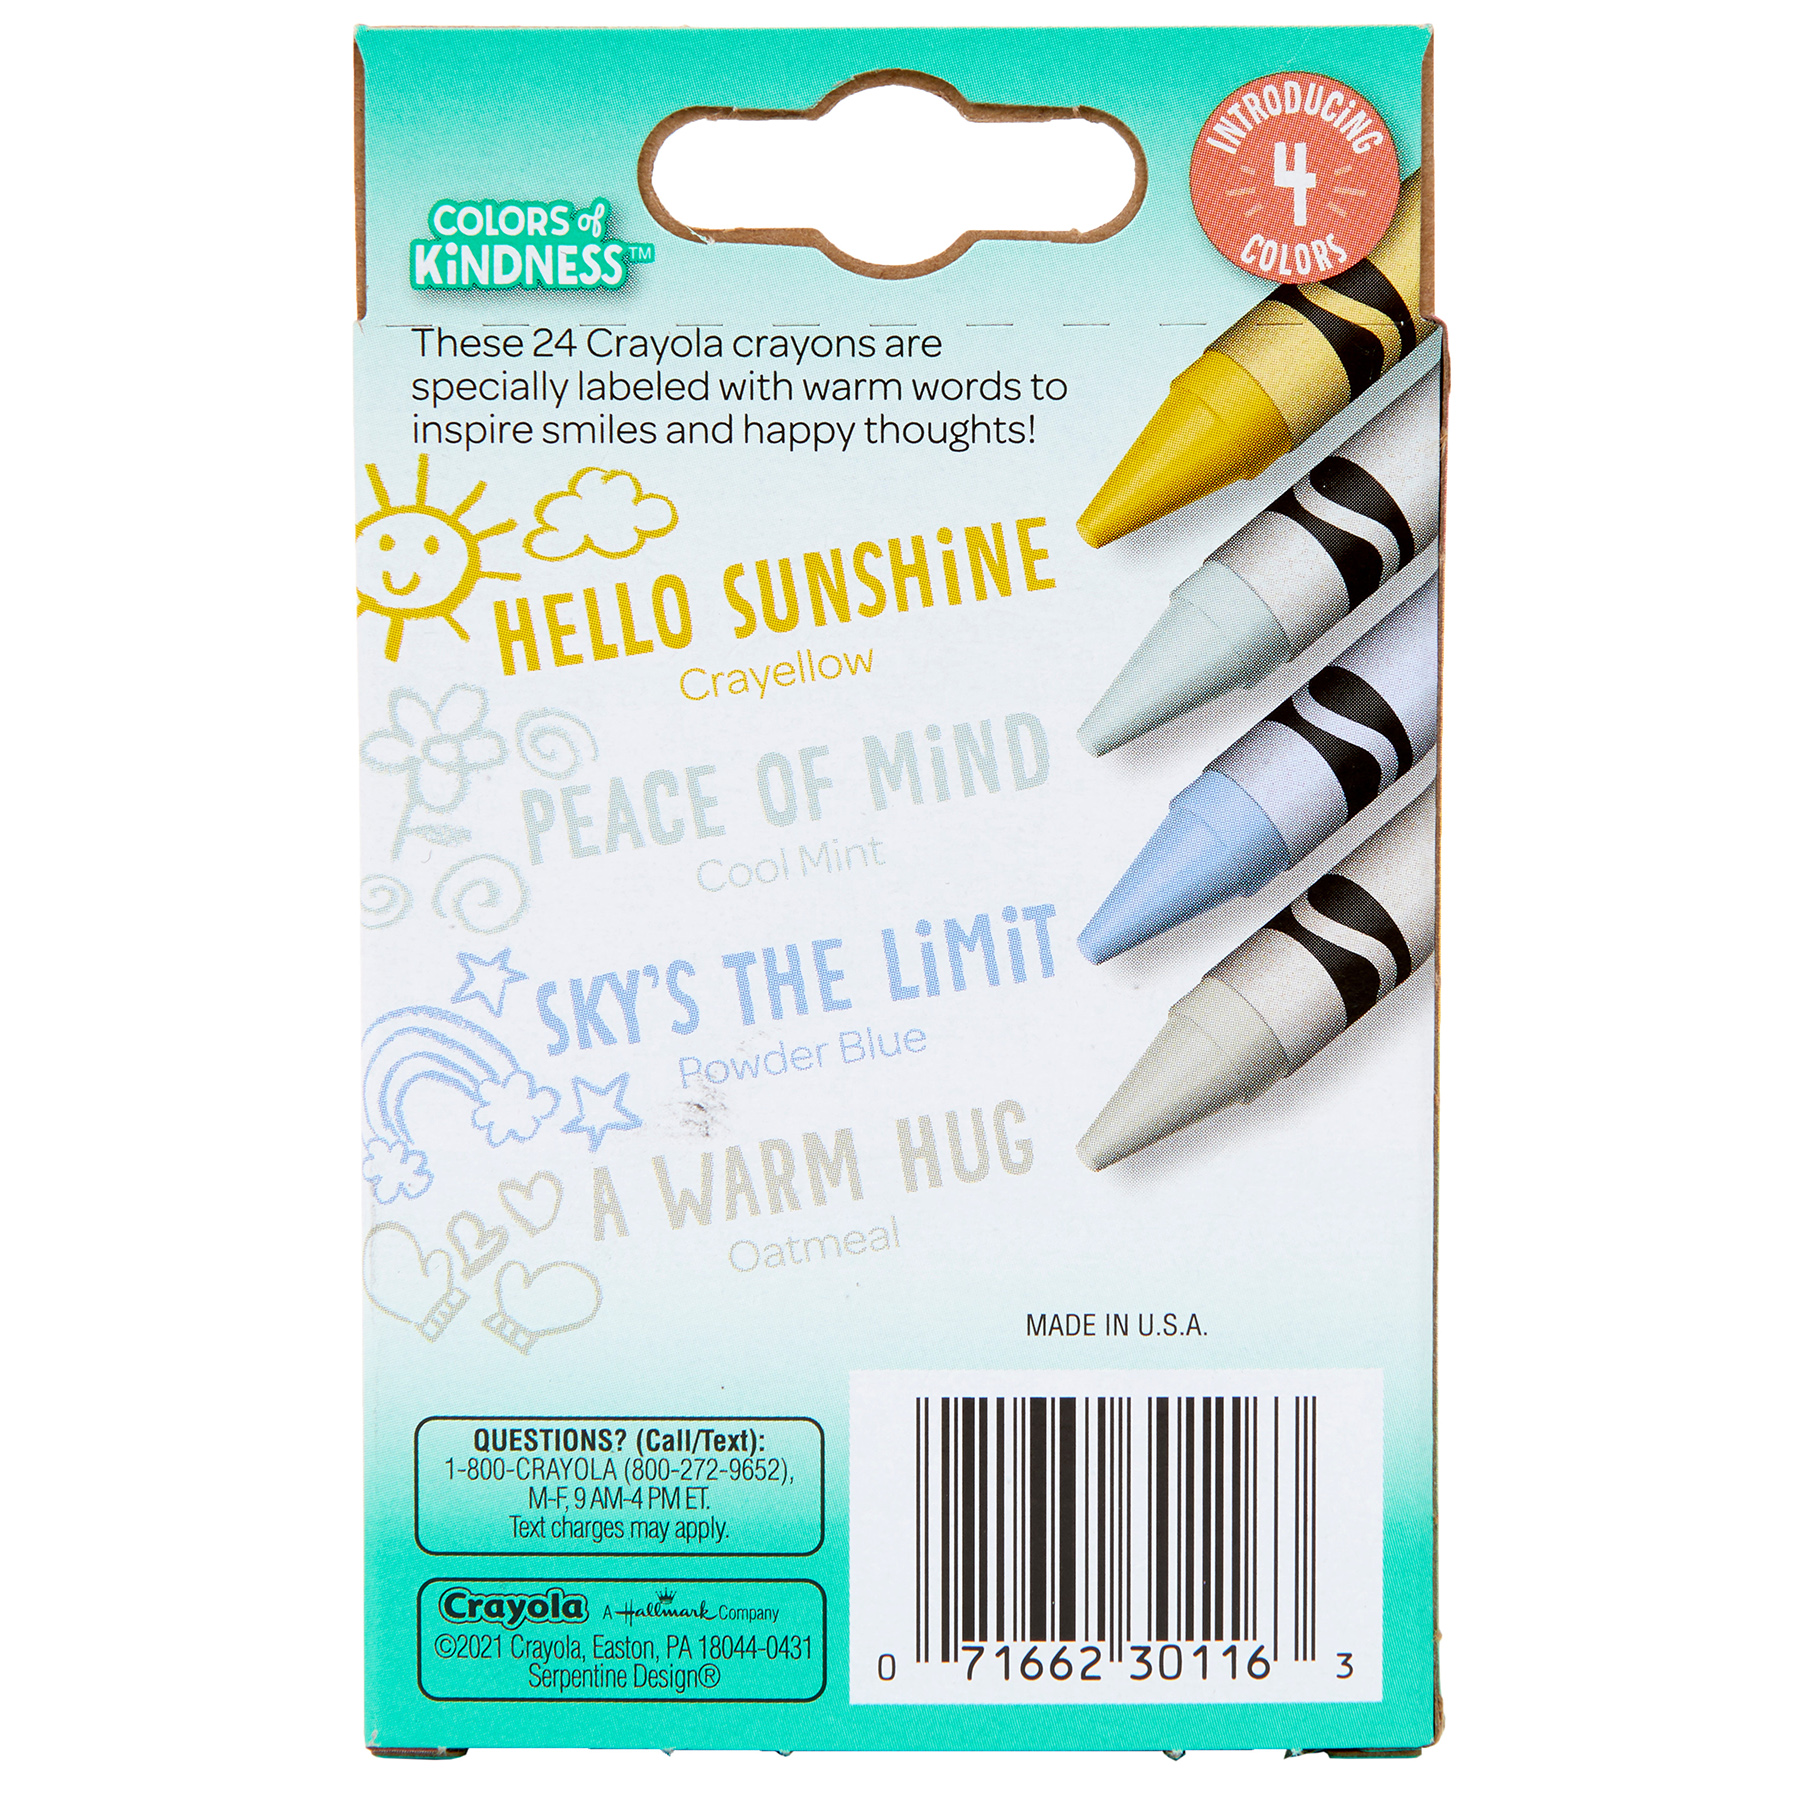 Crayola Helps Parents Raise Positive and Creatively Curious Children with  Special Edition “Colors of Kindness” Crayon Box - Licensing International